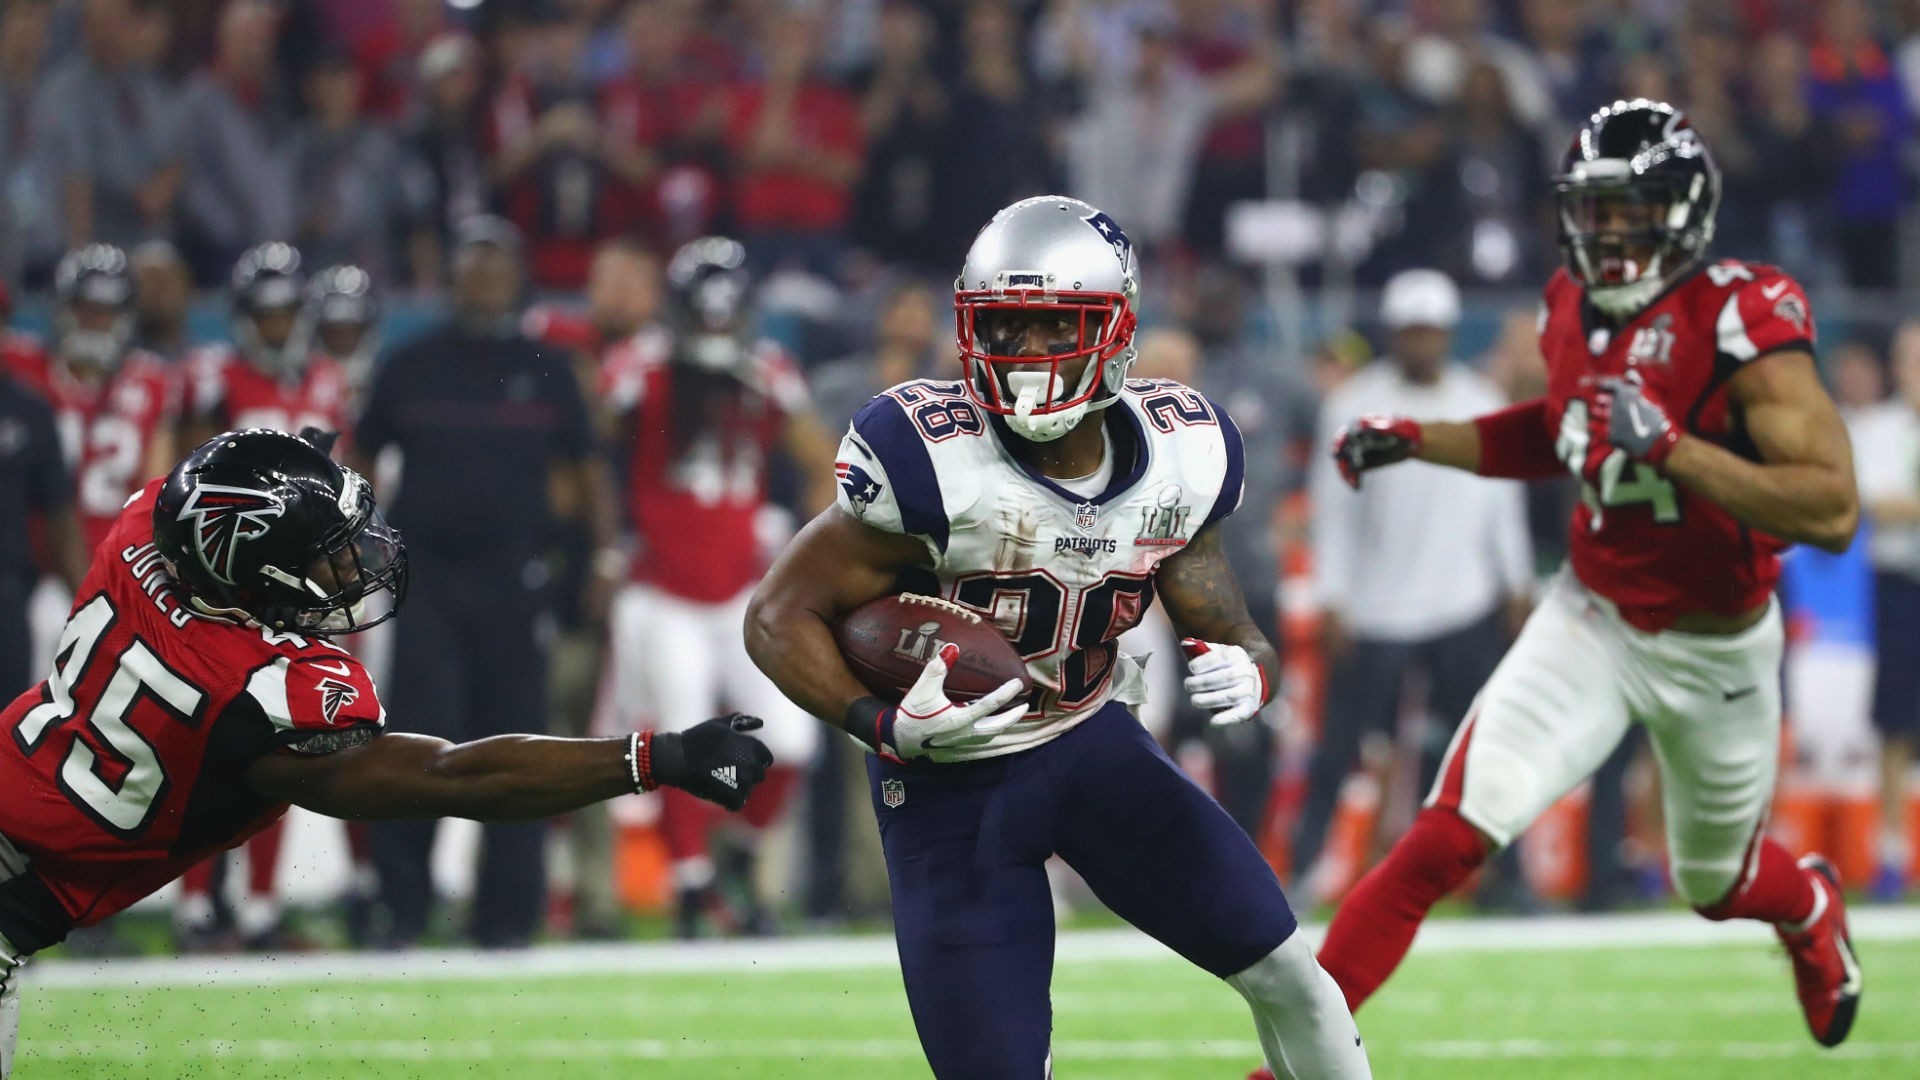 1920x1080 Super Bowl 51 James White S MVP Performance Fueled By Grandmother Wallpaper